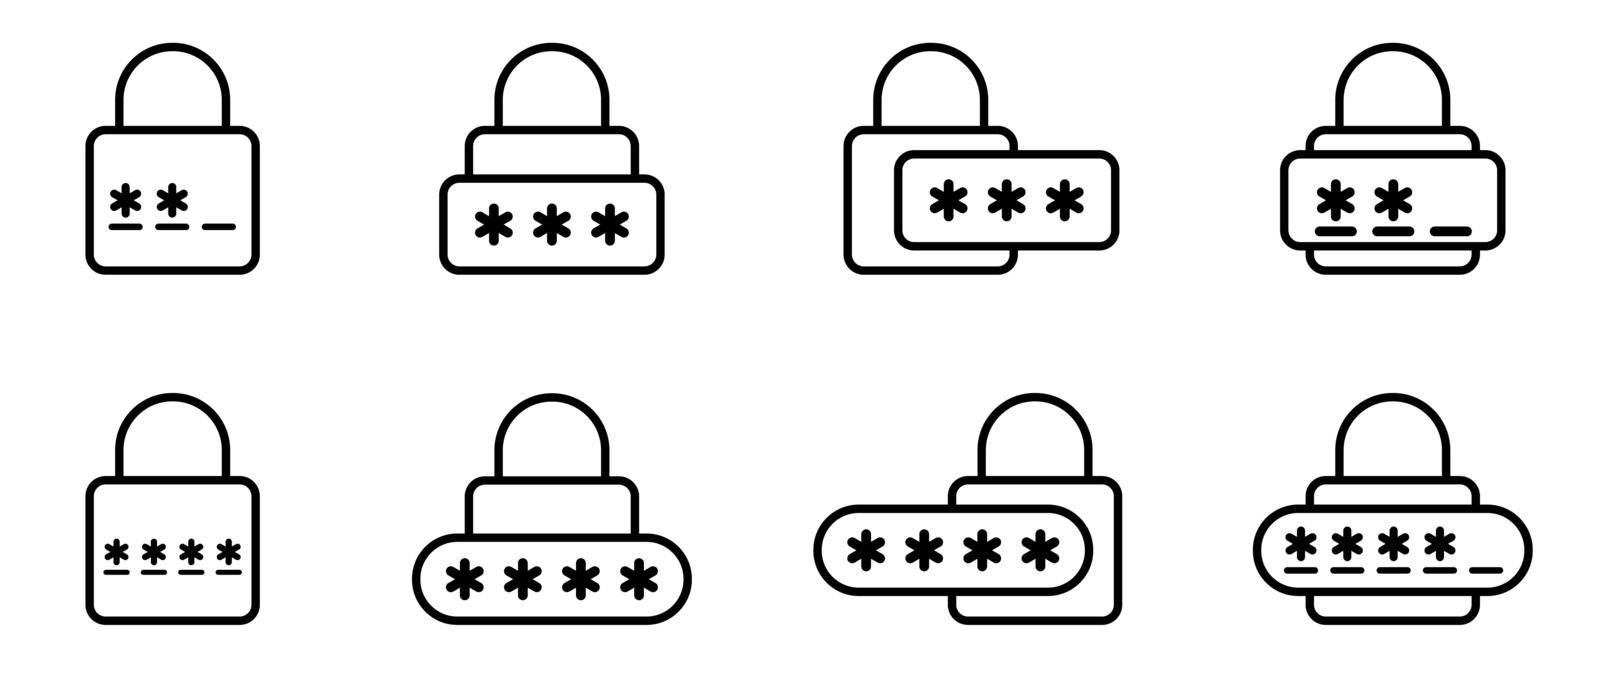 Password icon. Login icon. Vector pincode flat icons. Cyber security black icons. by Chekman